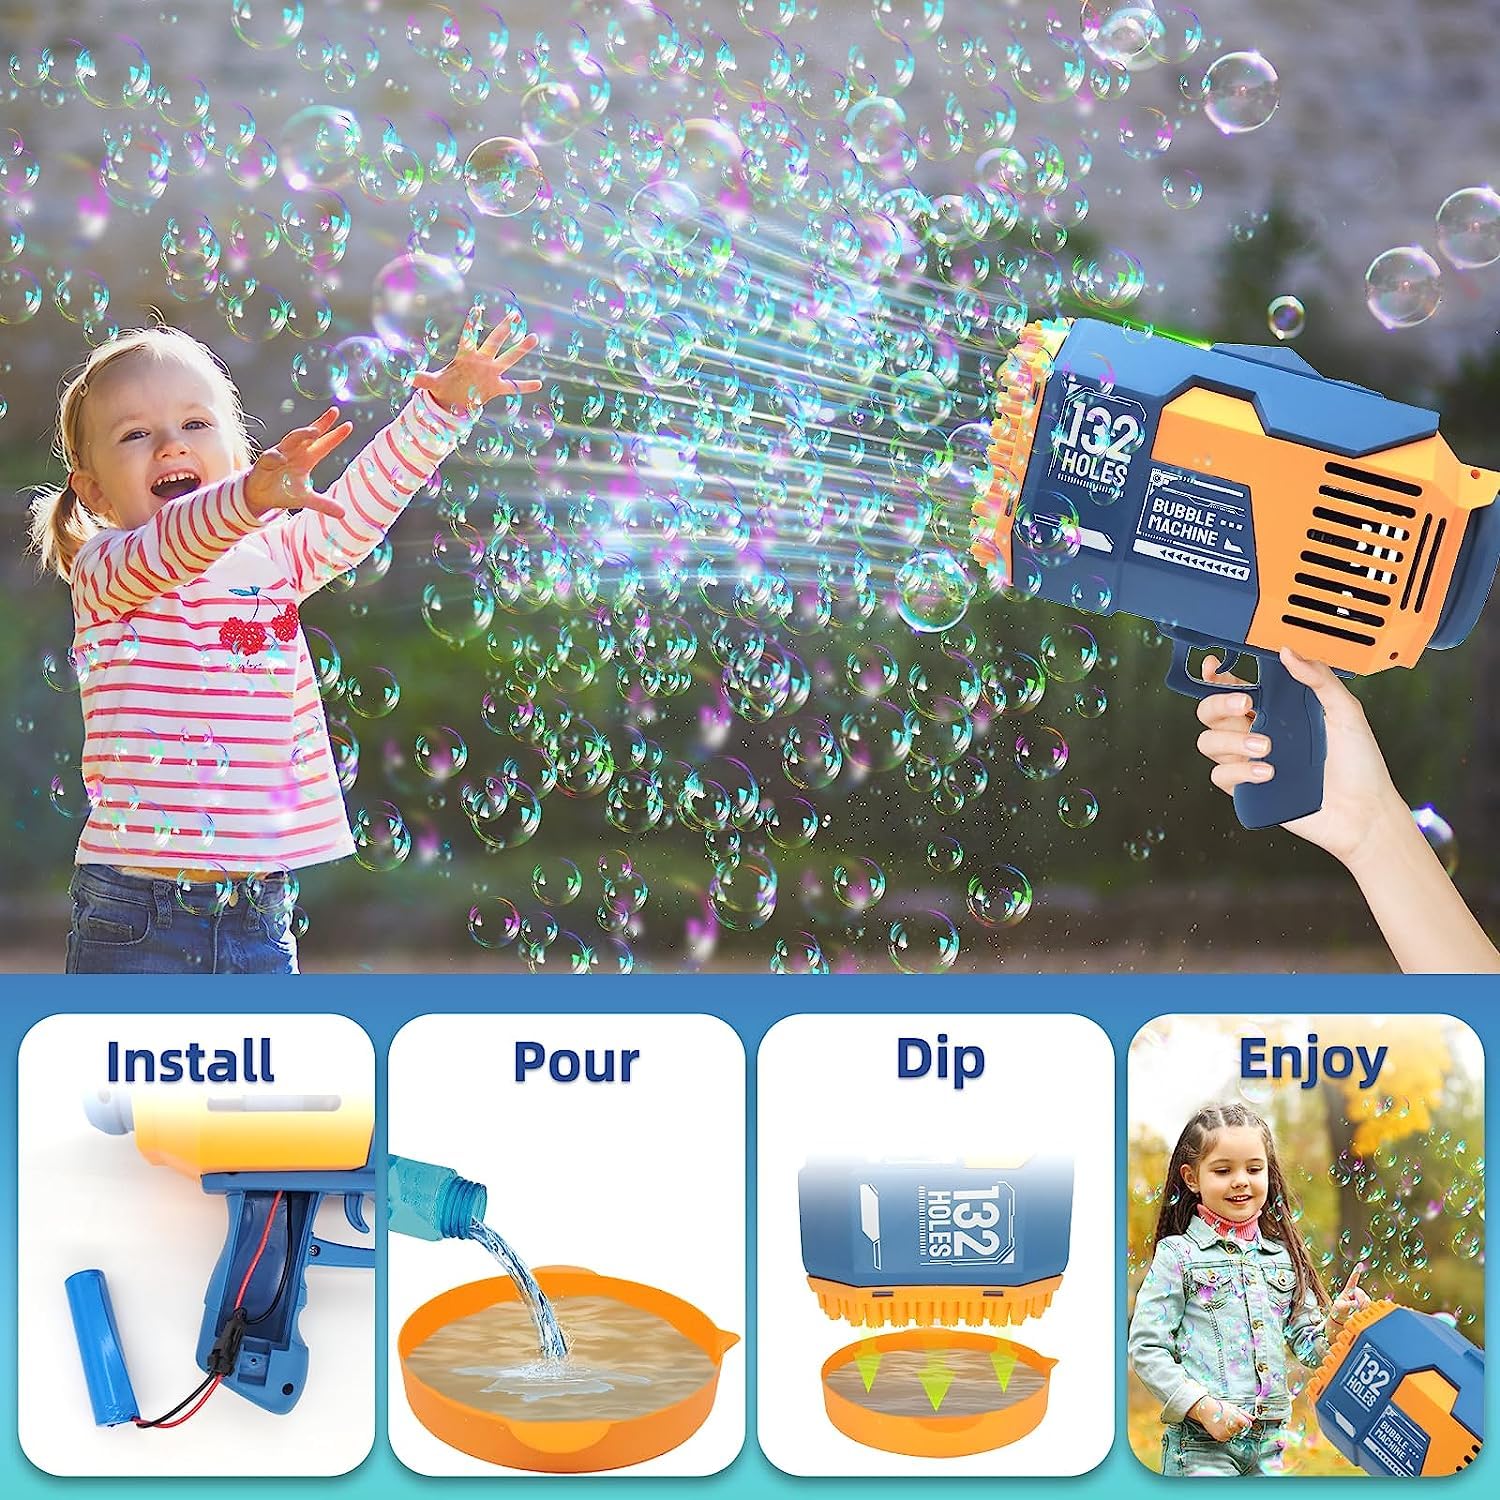 Bubble Machine Gun Kids Toys: 35000+ Bubbles Bazooka Bubble Gun Blaster Blower for Toddlers Girls Boys Ages 3 4 5 6 7 8 9 10 11 12 Year Old Outdoor Summer Fun Gifts Birthday Party Wedding